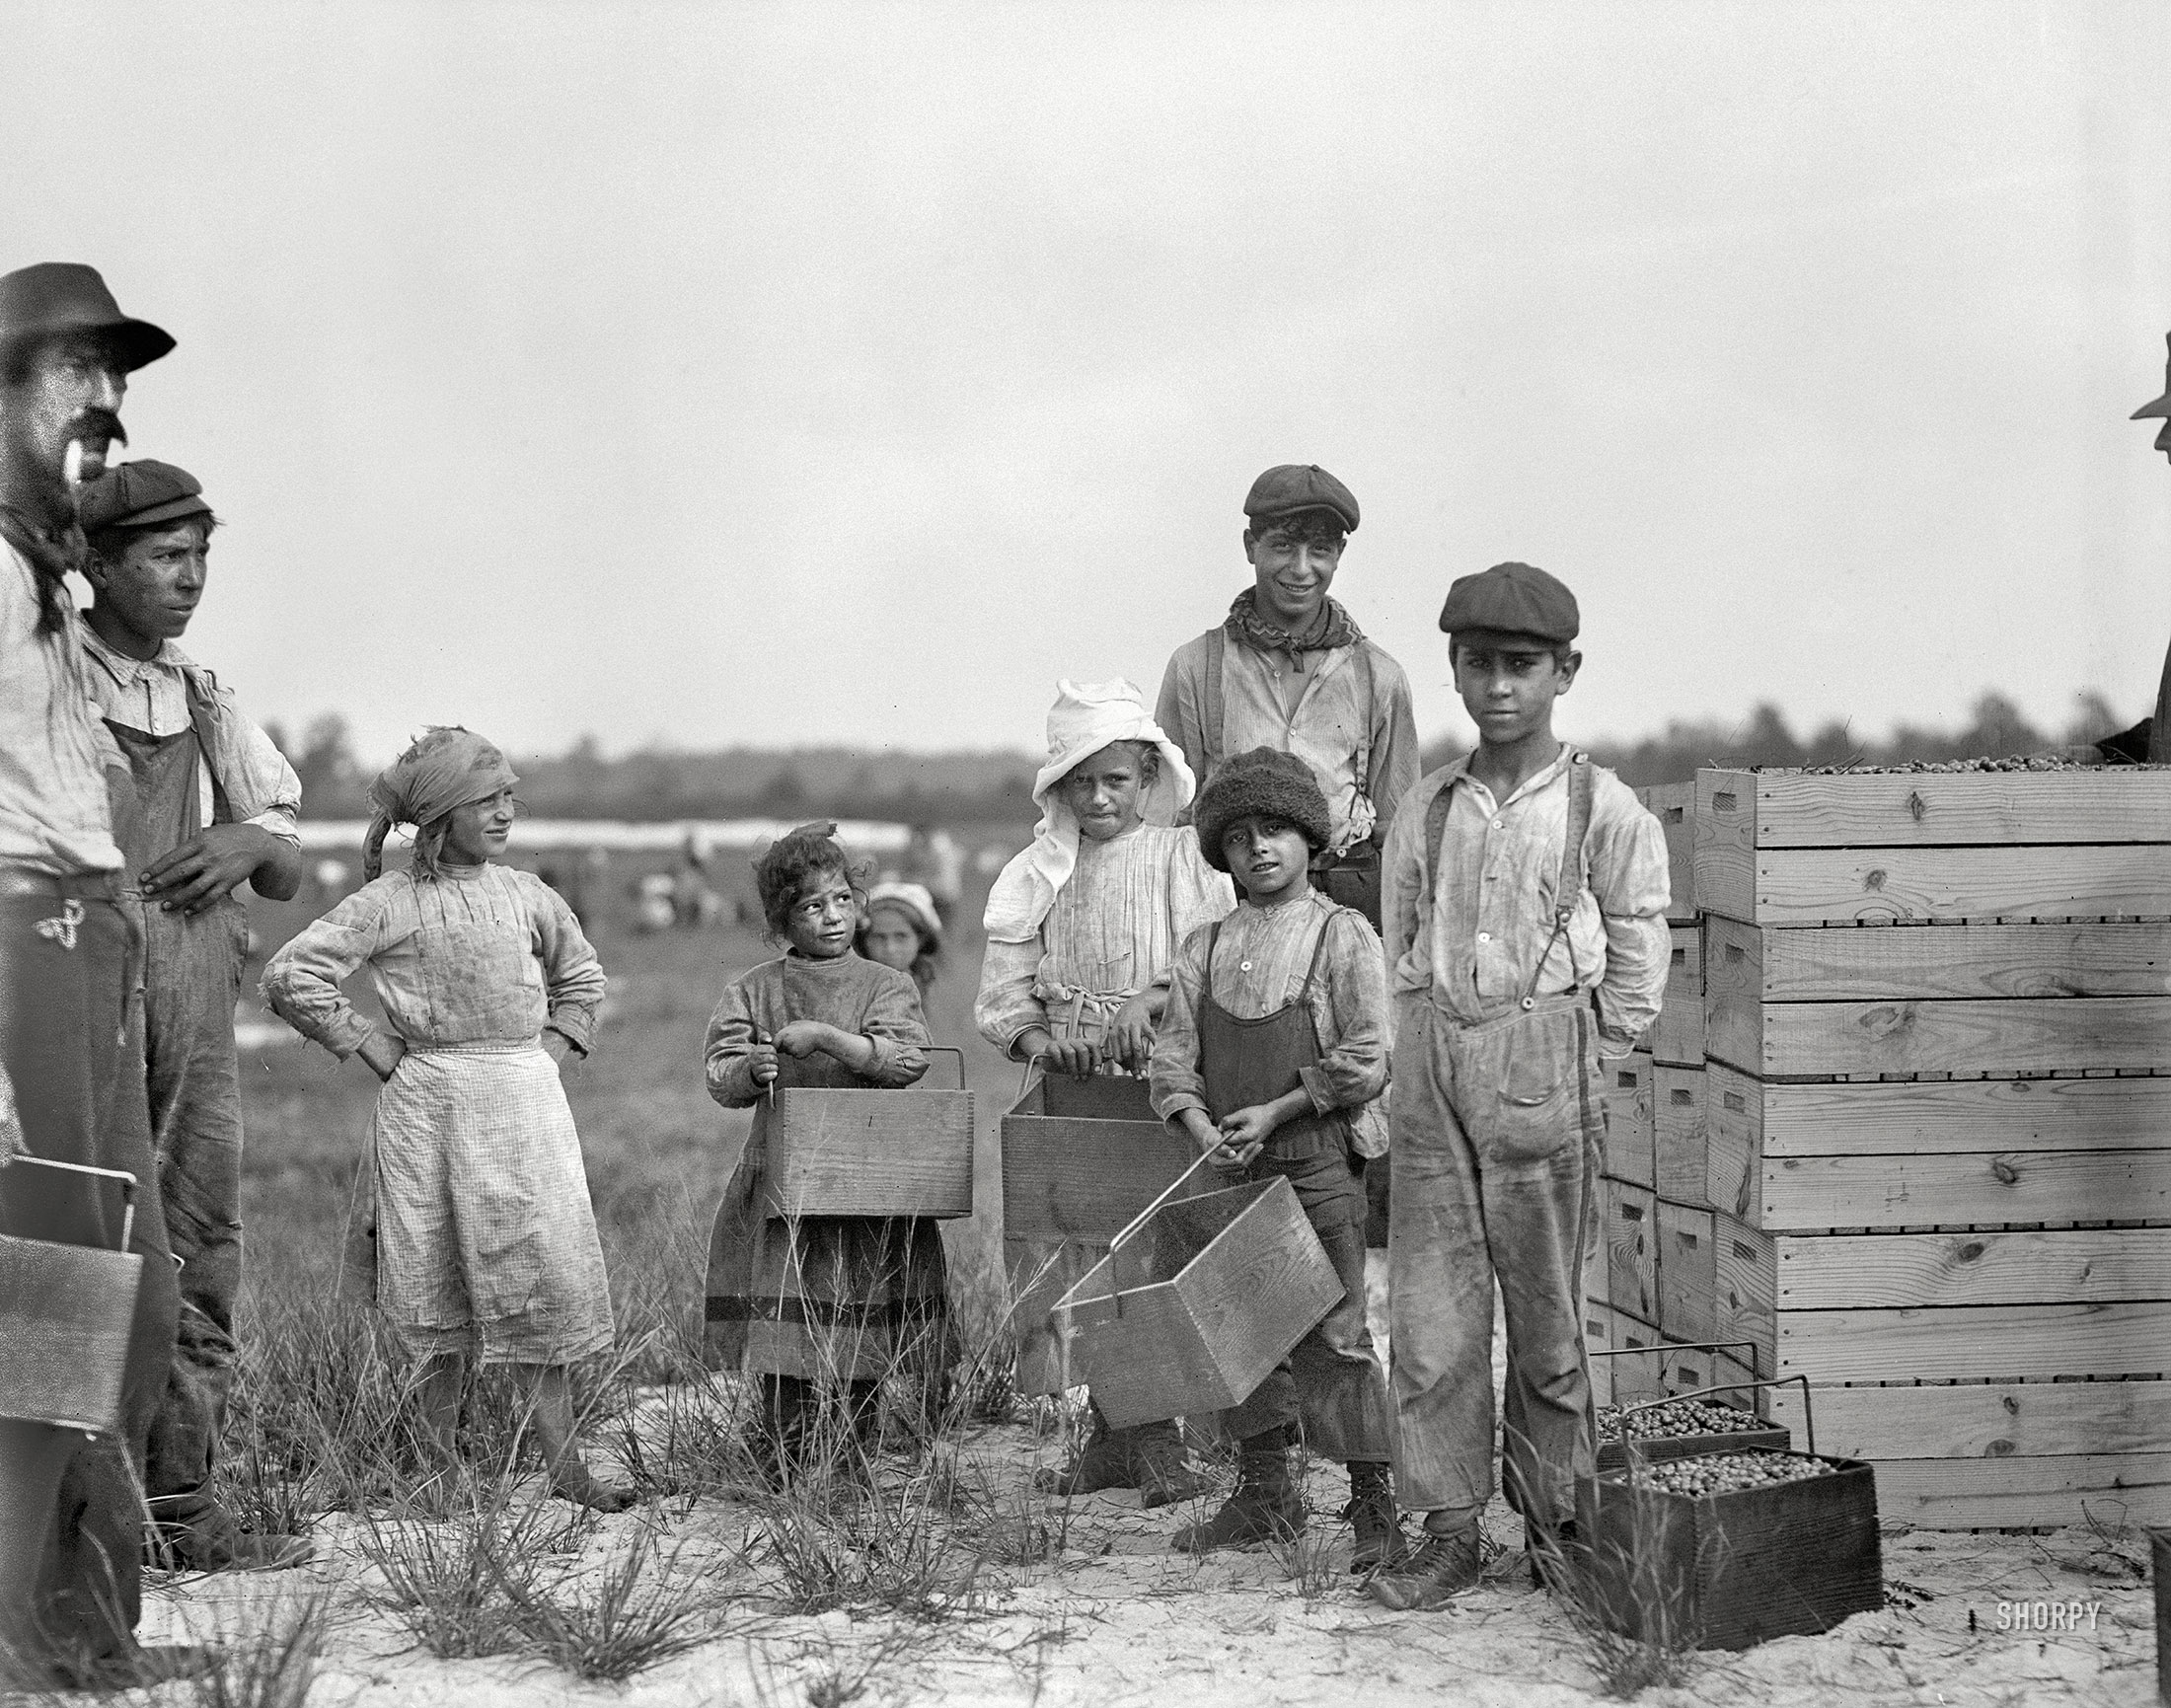 September 28, 1910. Browns Mills, New Jersey. "Smallest girl is 10-year-old Rosie Biodo, 1216 Annan St., Philadelphia. Carries cranberries at White's Bog. This is the fourth week of school in Philadelphia, and the people here expect to remain here two weeks more." Photograph by Lewis Wickes Hine. View full size.